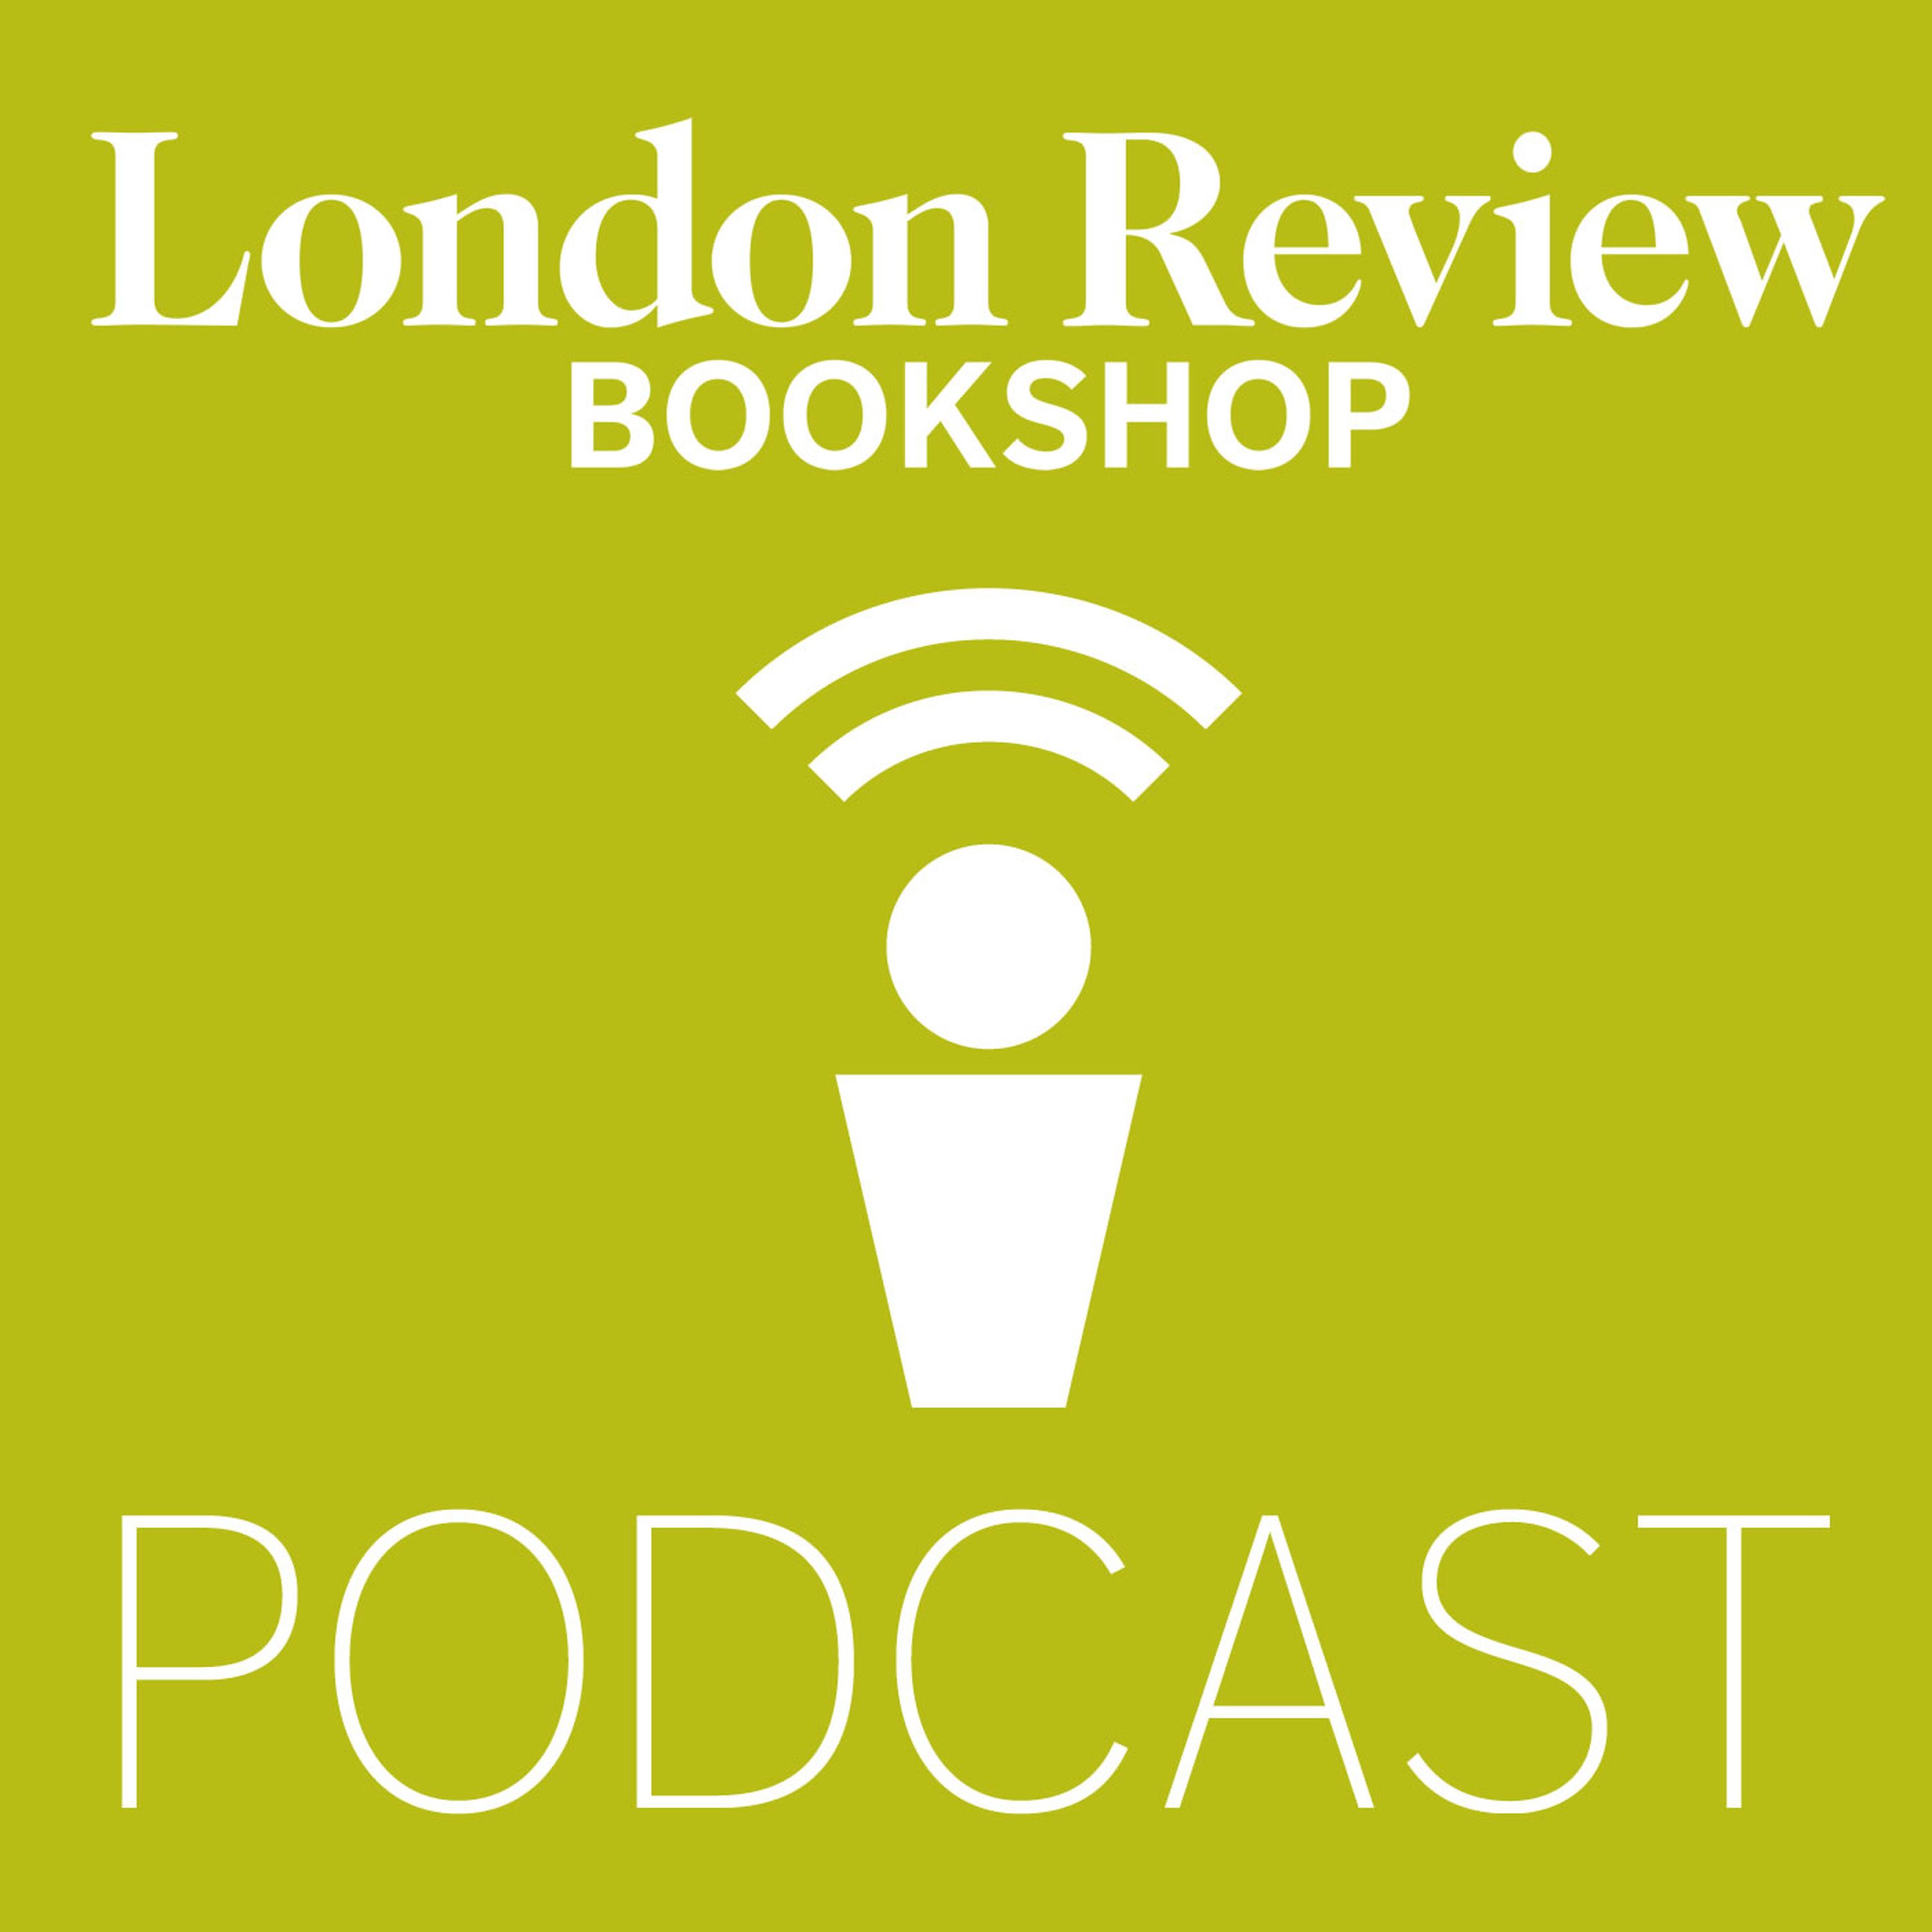 Race and Poetry Reviewing: Kayo Chingonyi, Bhanu Kapil, Ilya Kaminsky and Parul Sehgalhttp://media.londonreviewbookshop.co.uk/2019-06-21-race-and-poetry-event.mp3